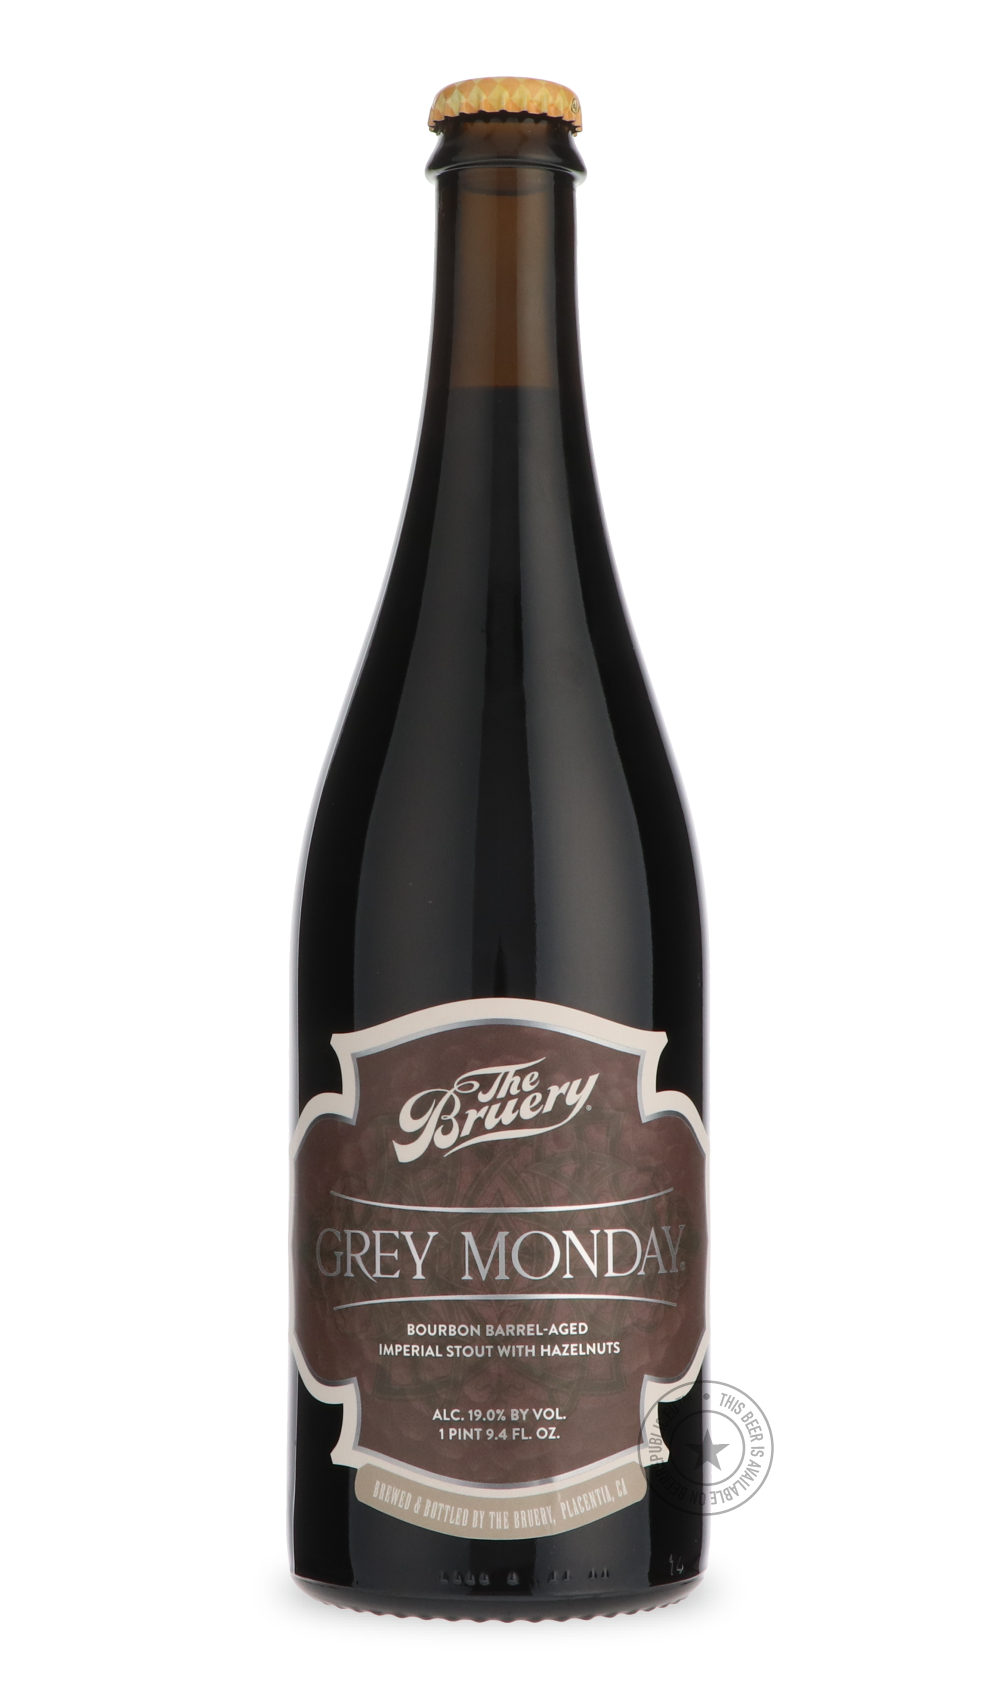 -The Bruery- Grey Monday-Stout & Porter- Only @ Beer Republic - The best online beer store for American & Canadian craft beer - Buy beer online from the USA and Canada - Bier online kopen - Amerikaans bier kopen - Craft beer store - Craft beer kopen - Amerikanisch bier kaufen - Bier online kaufen - Acheter biere online - IPA - Stout - Porter - New England IPA - Hazy IPA - Imperial Stout - Barrel Aged - Barrel Aged Imperial Stout - Brown - Dark beer - Blond - Blonde - Pilsner - Lager - Wheat - Weizen - Amber